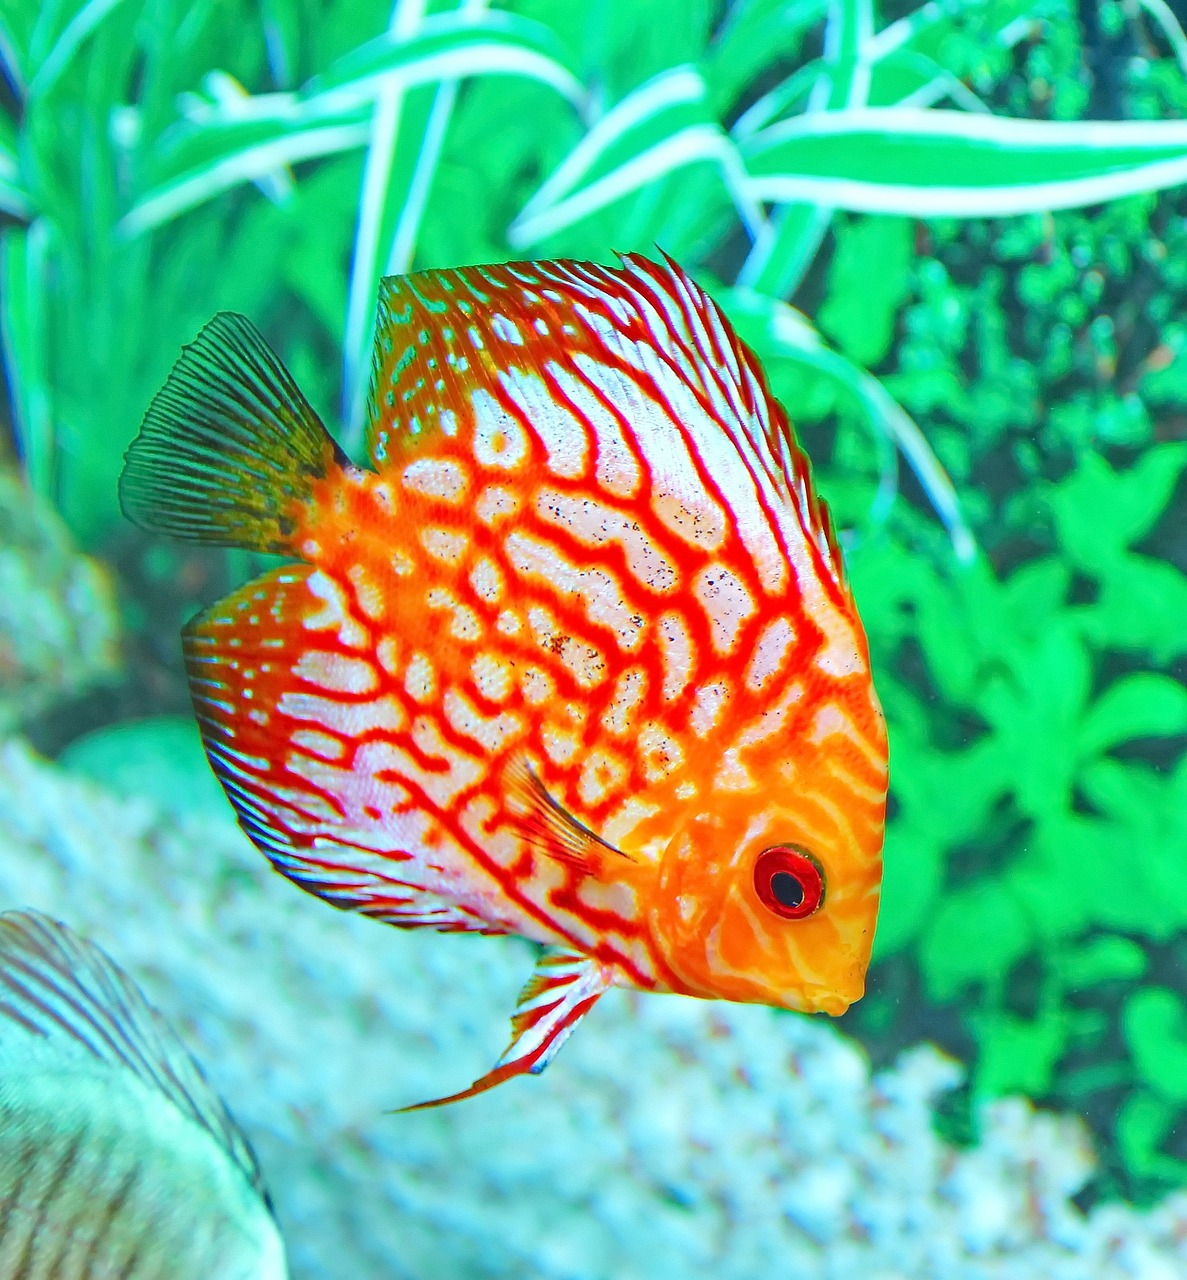 a close up of a fish in an aquarium, by Anna Haifisch, red and orange colored, the cytoplasm”, dsrl photo